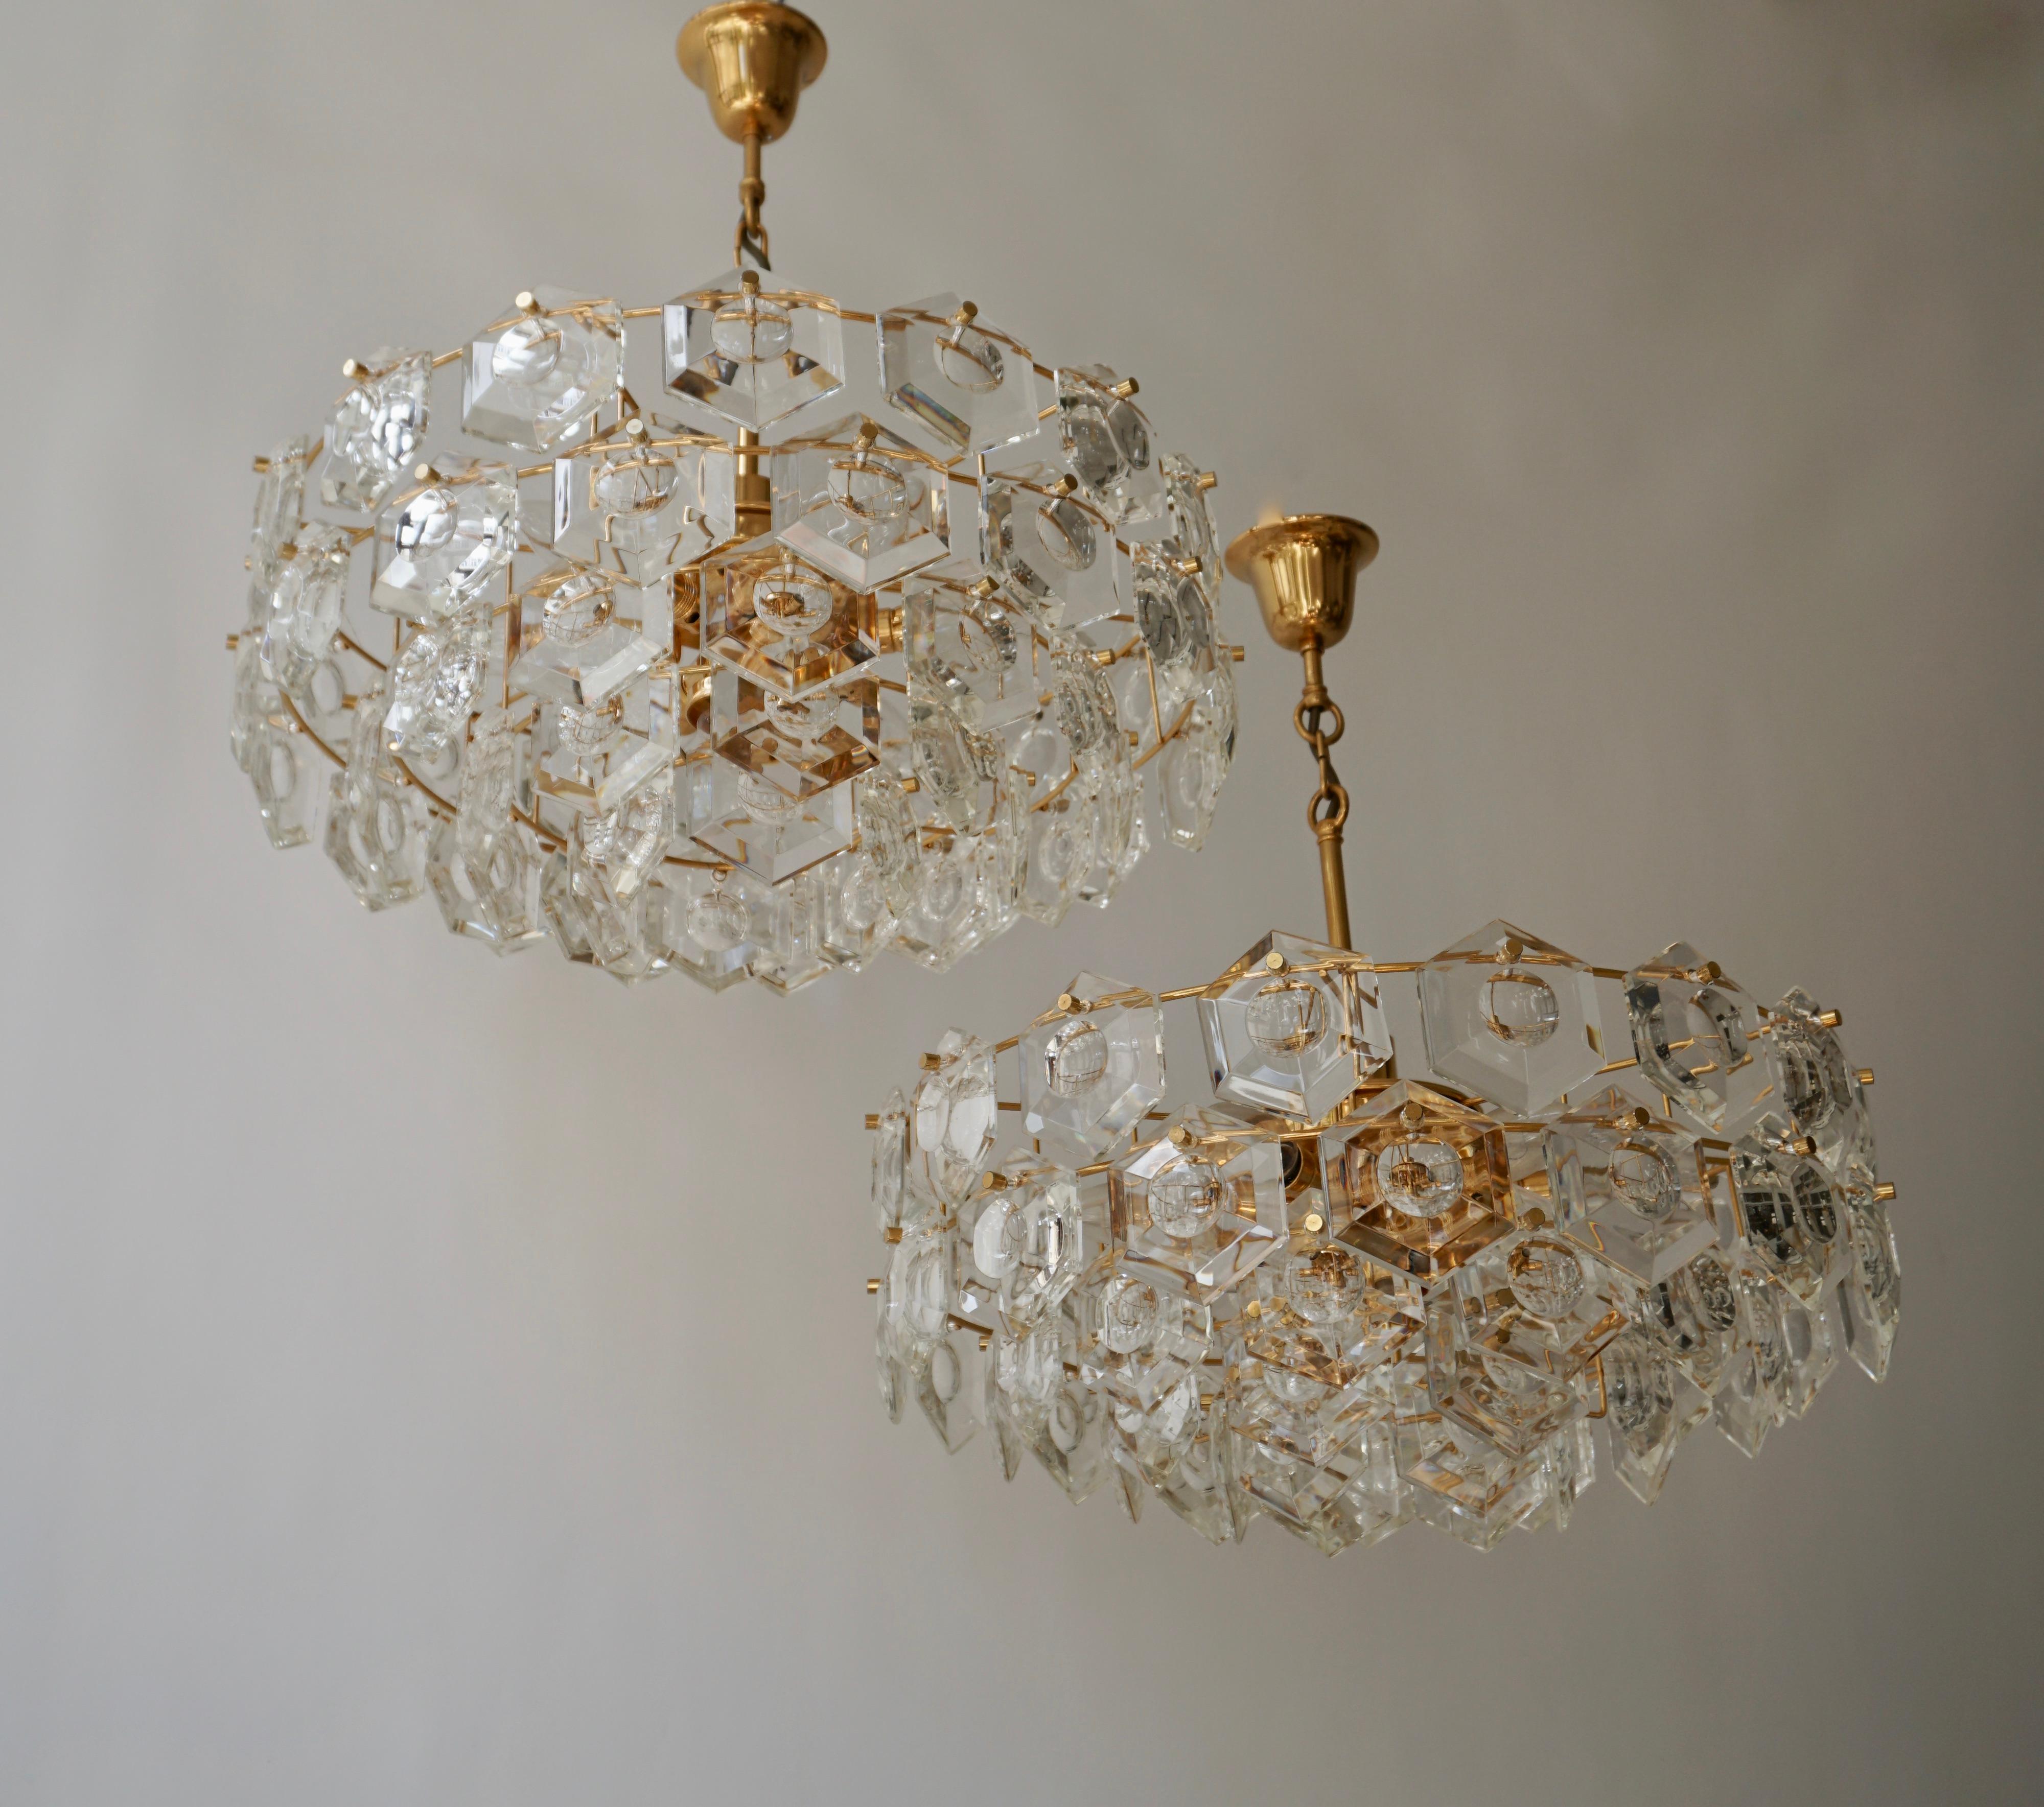 Two chandeliers with sculptural faceted crystals on a gold-plated brass frame made by Kinkeldey, Germany in the 1960s.
The lamp takes one large and six small Edison base bulbs.
Very good condition.

Measures:
Diameter 52 cm.
Height fixture 23